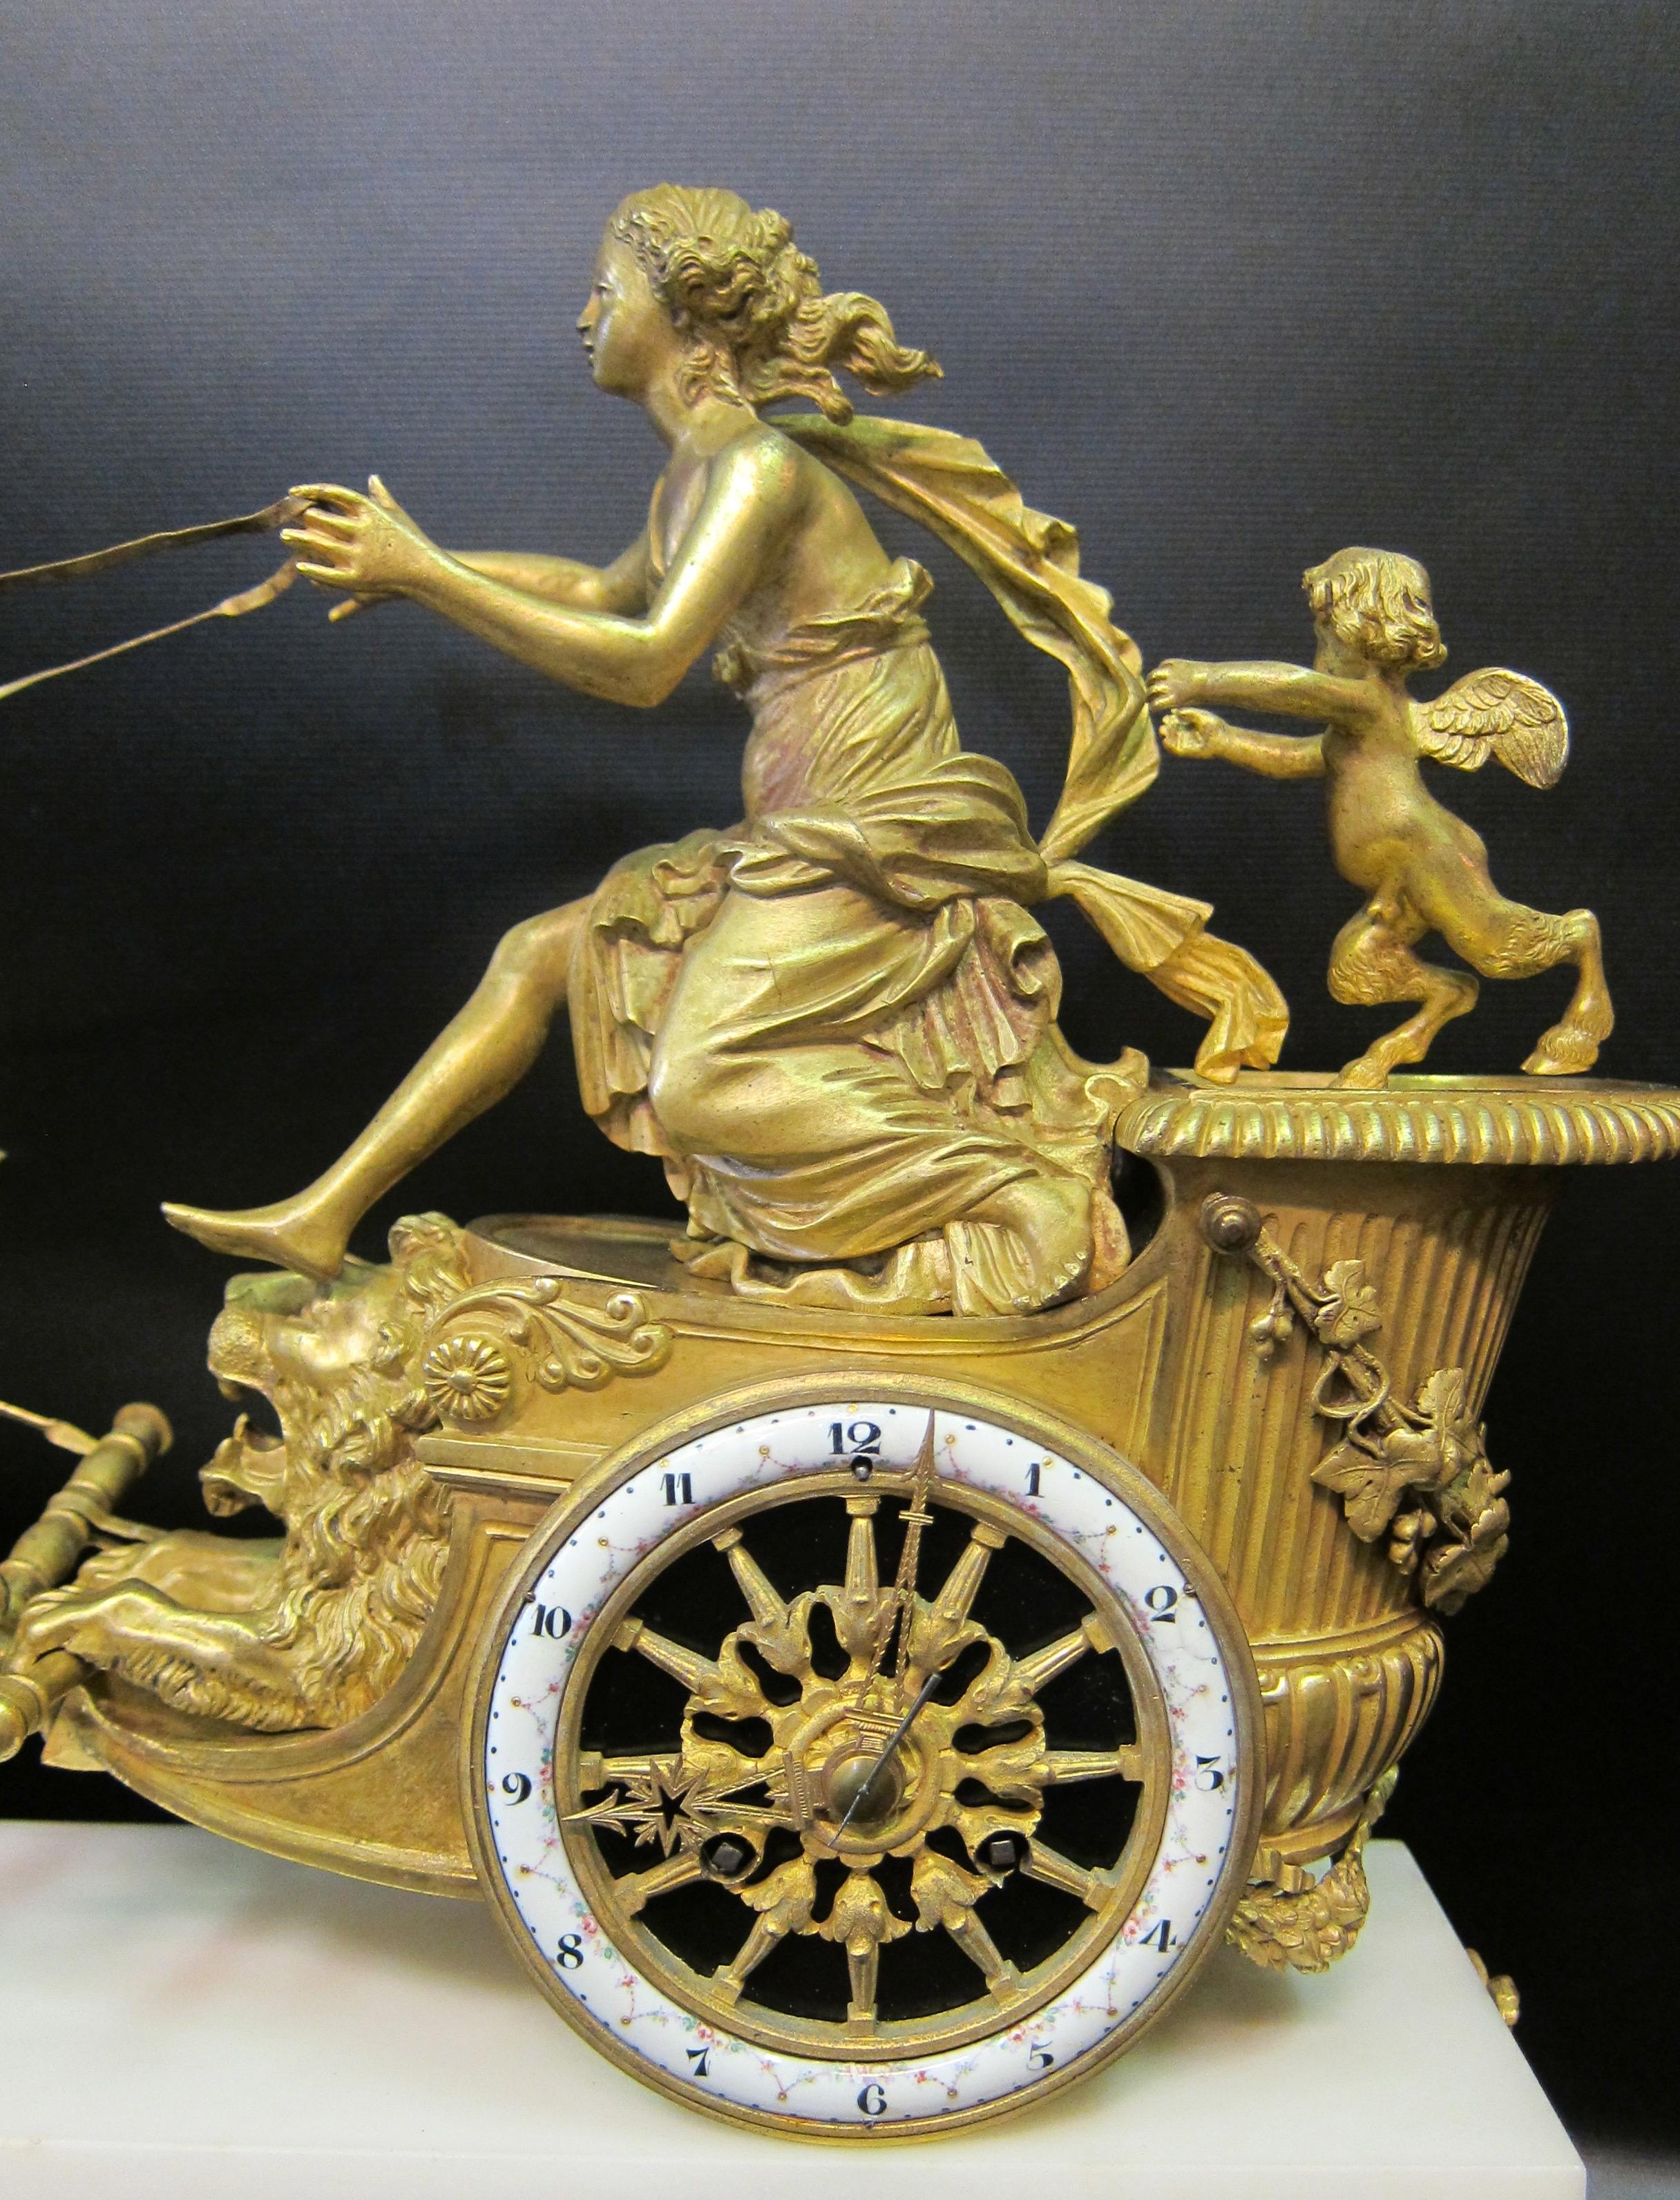 This vintage, circa 1855, French Empire mantel clock is designed with a doré bronze mythological subject upon a footed white marble and gilt bronze platform. The mounted bronze sculpture is that of the goddess Aurora racing against time to chase the